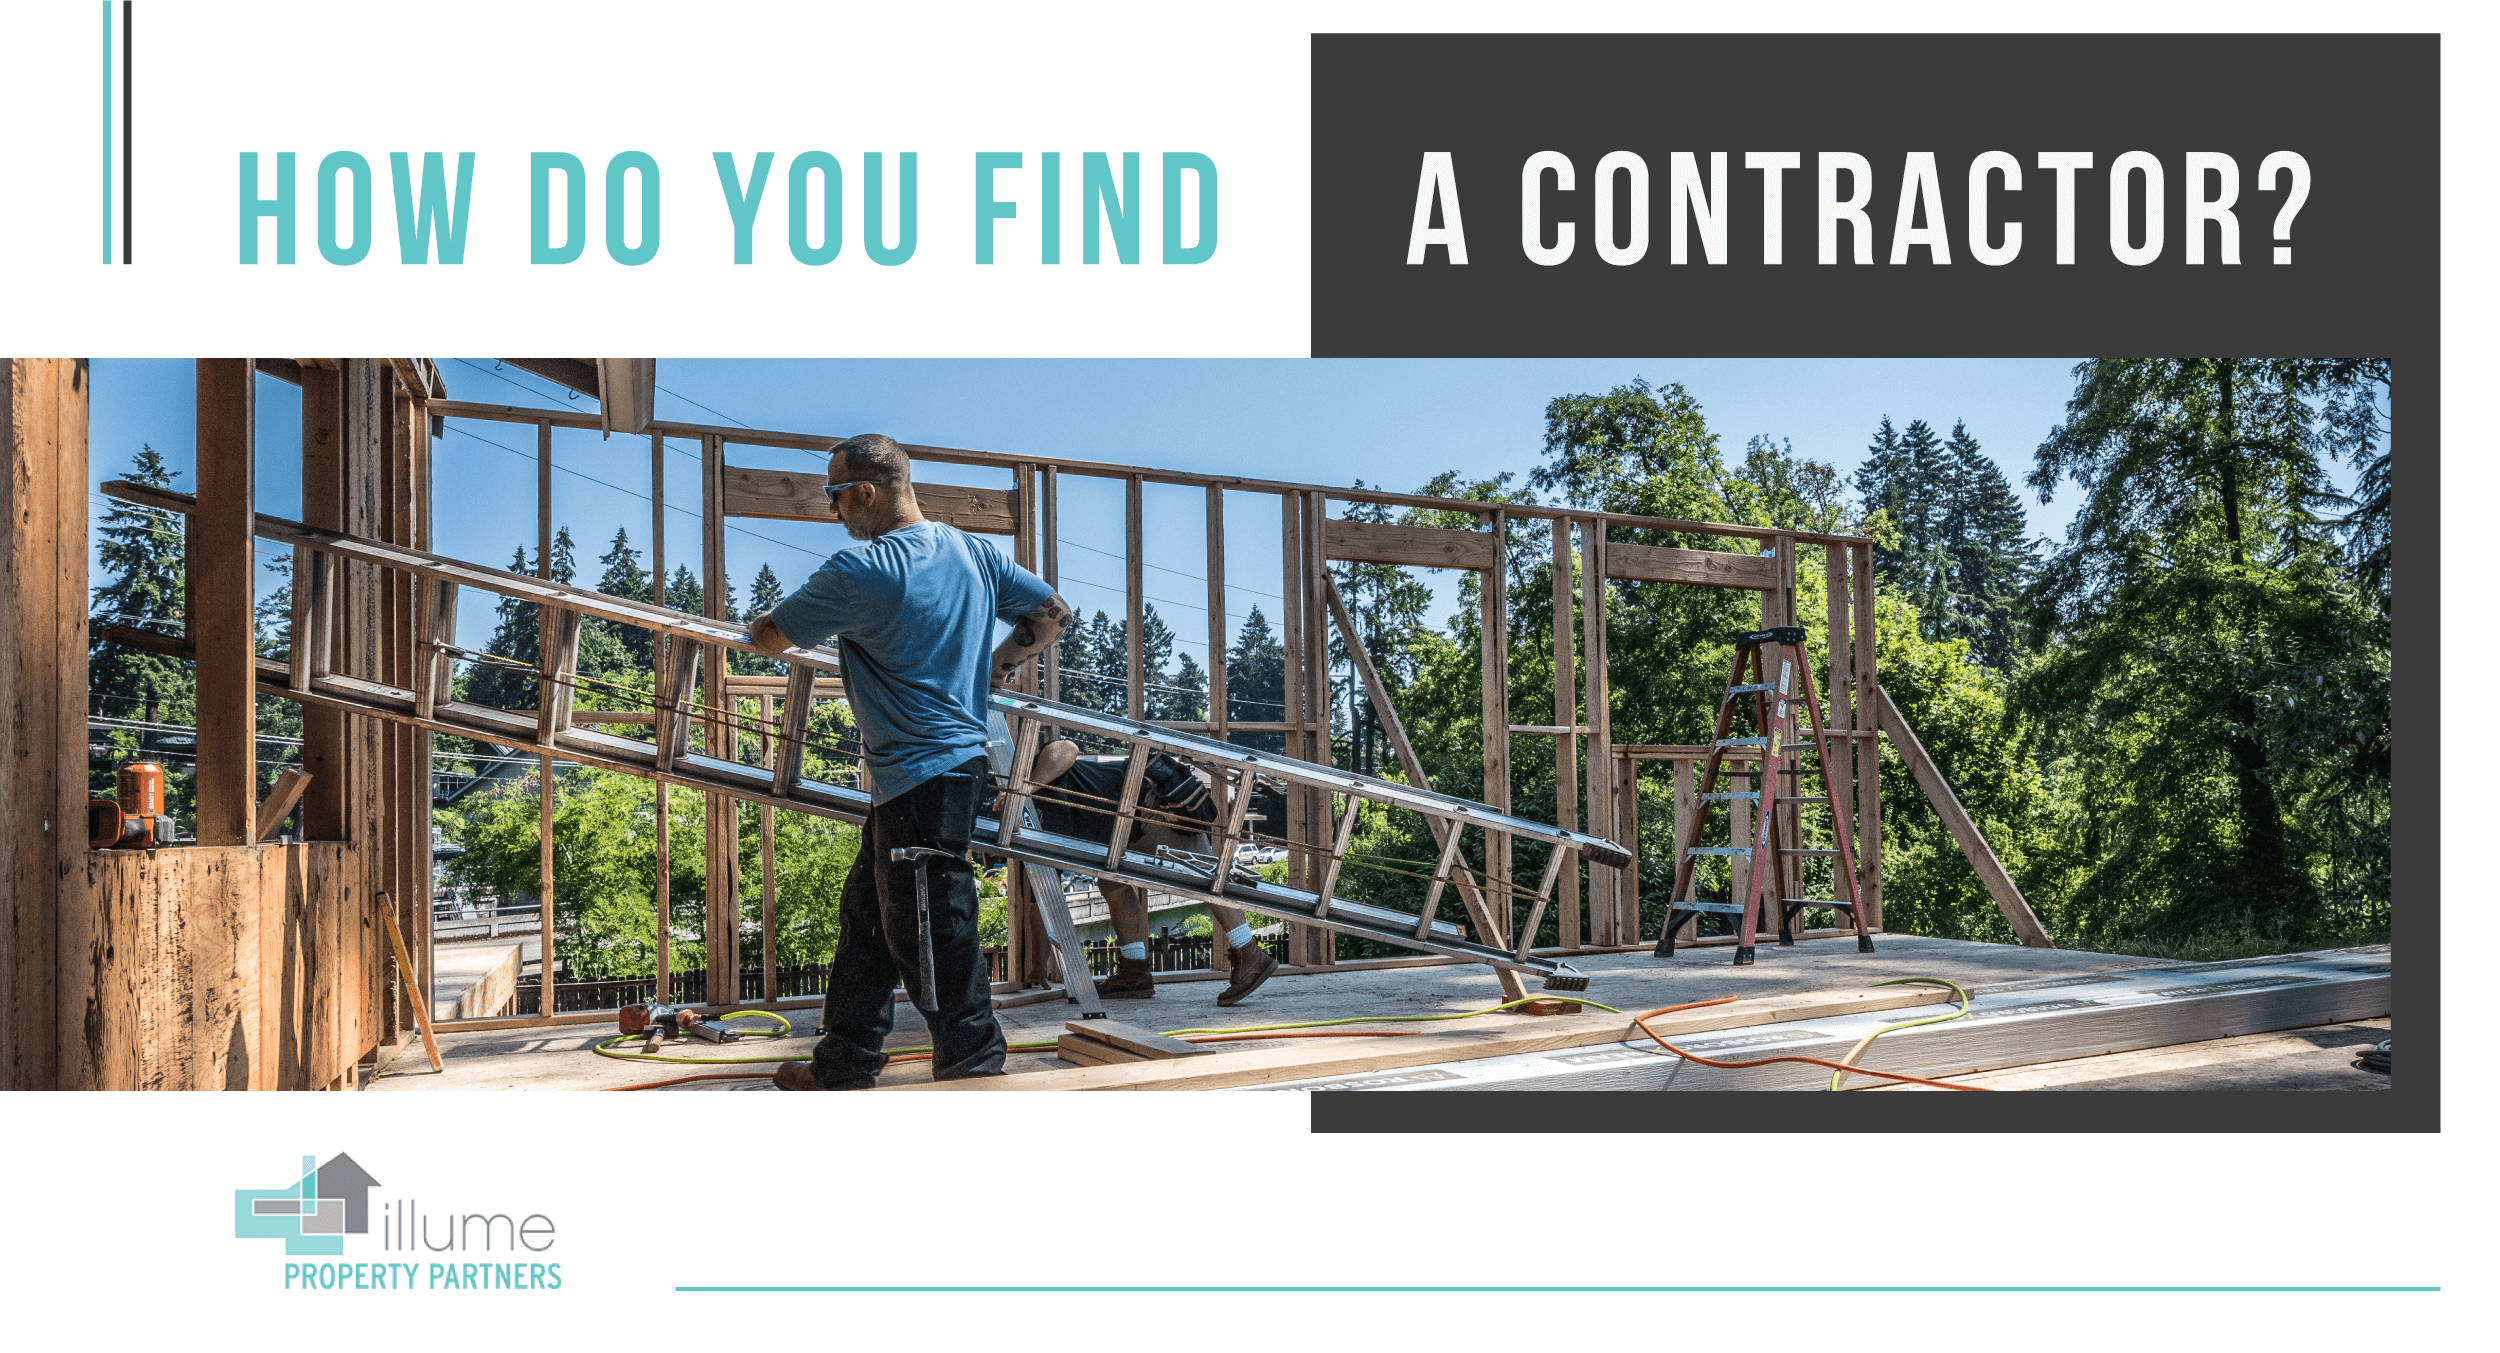 How Do You Find a Contractor?